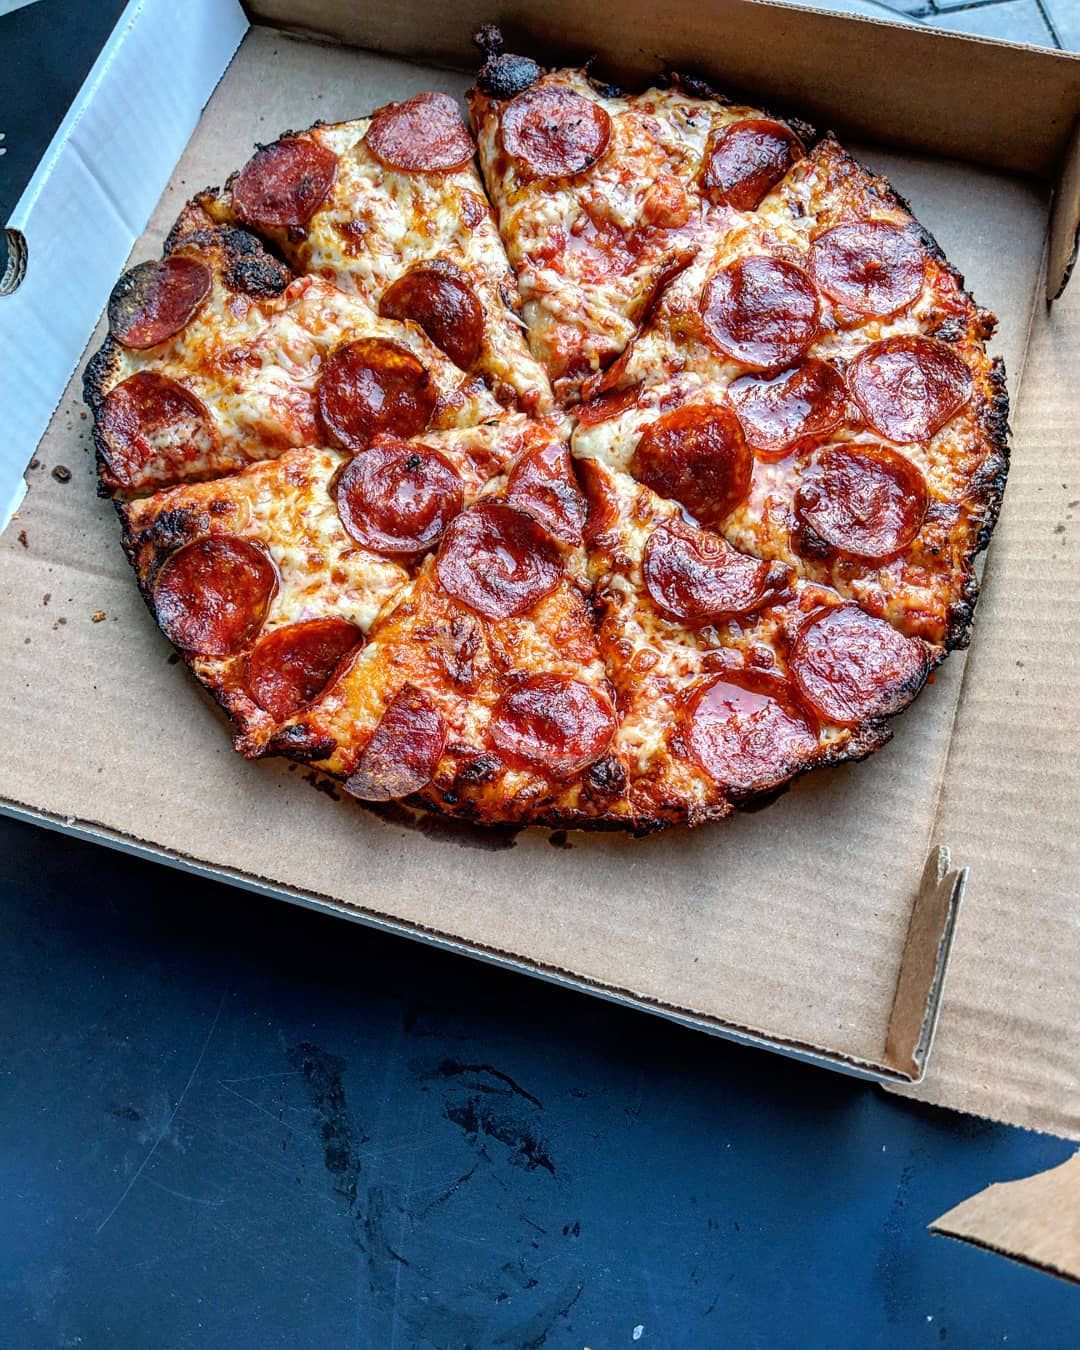 Overhead view of a pepperoni pizza in the style of Massachusetts’ South Shore-style bar pizza, with a barely-there, lacy, charred edge and bubbly brown cheese spots